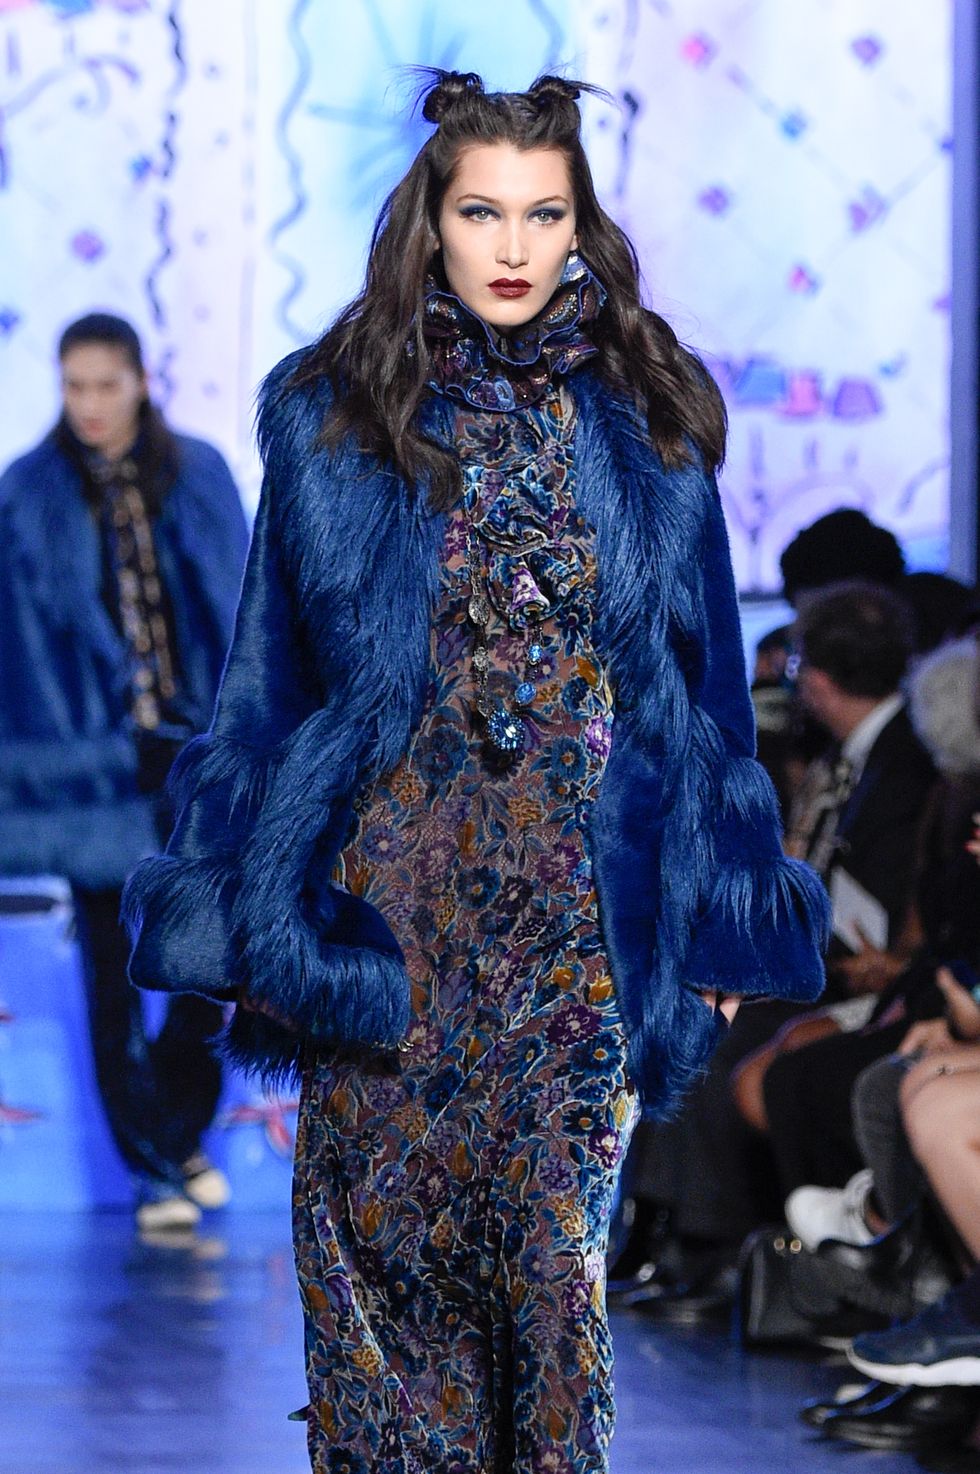 NEW YORK, NY - FEBRUARY 15:  Bella Hadid walks the runway for the Anna Sui collection during New York Fashion Week: The Shows at Gallery 1, Skylight Clarkson Sq on February 15, 2017 in New York City.  (Photo by Peter White/WireImage)